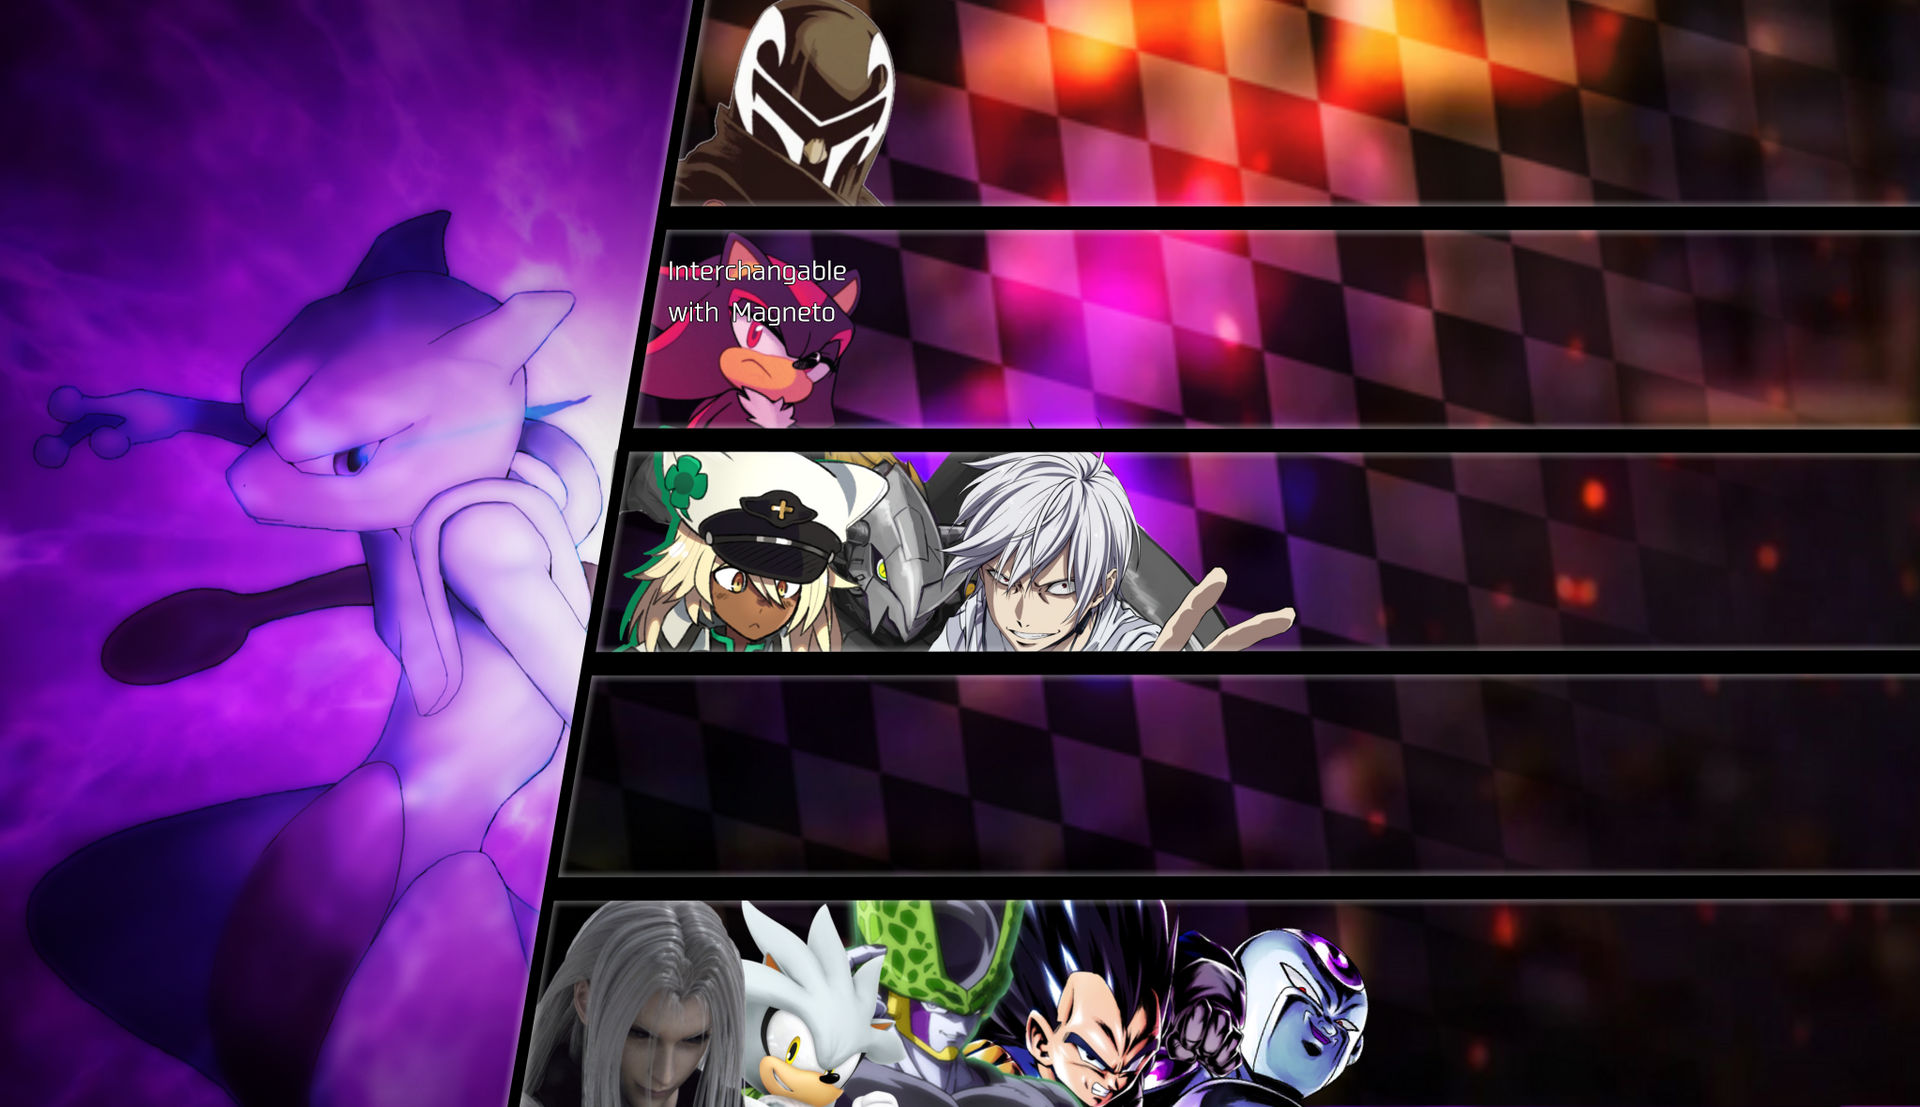 Mewtwo X Tier list August 2023